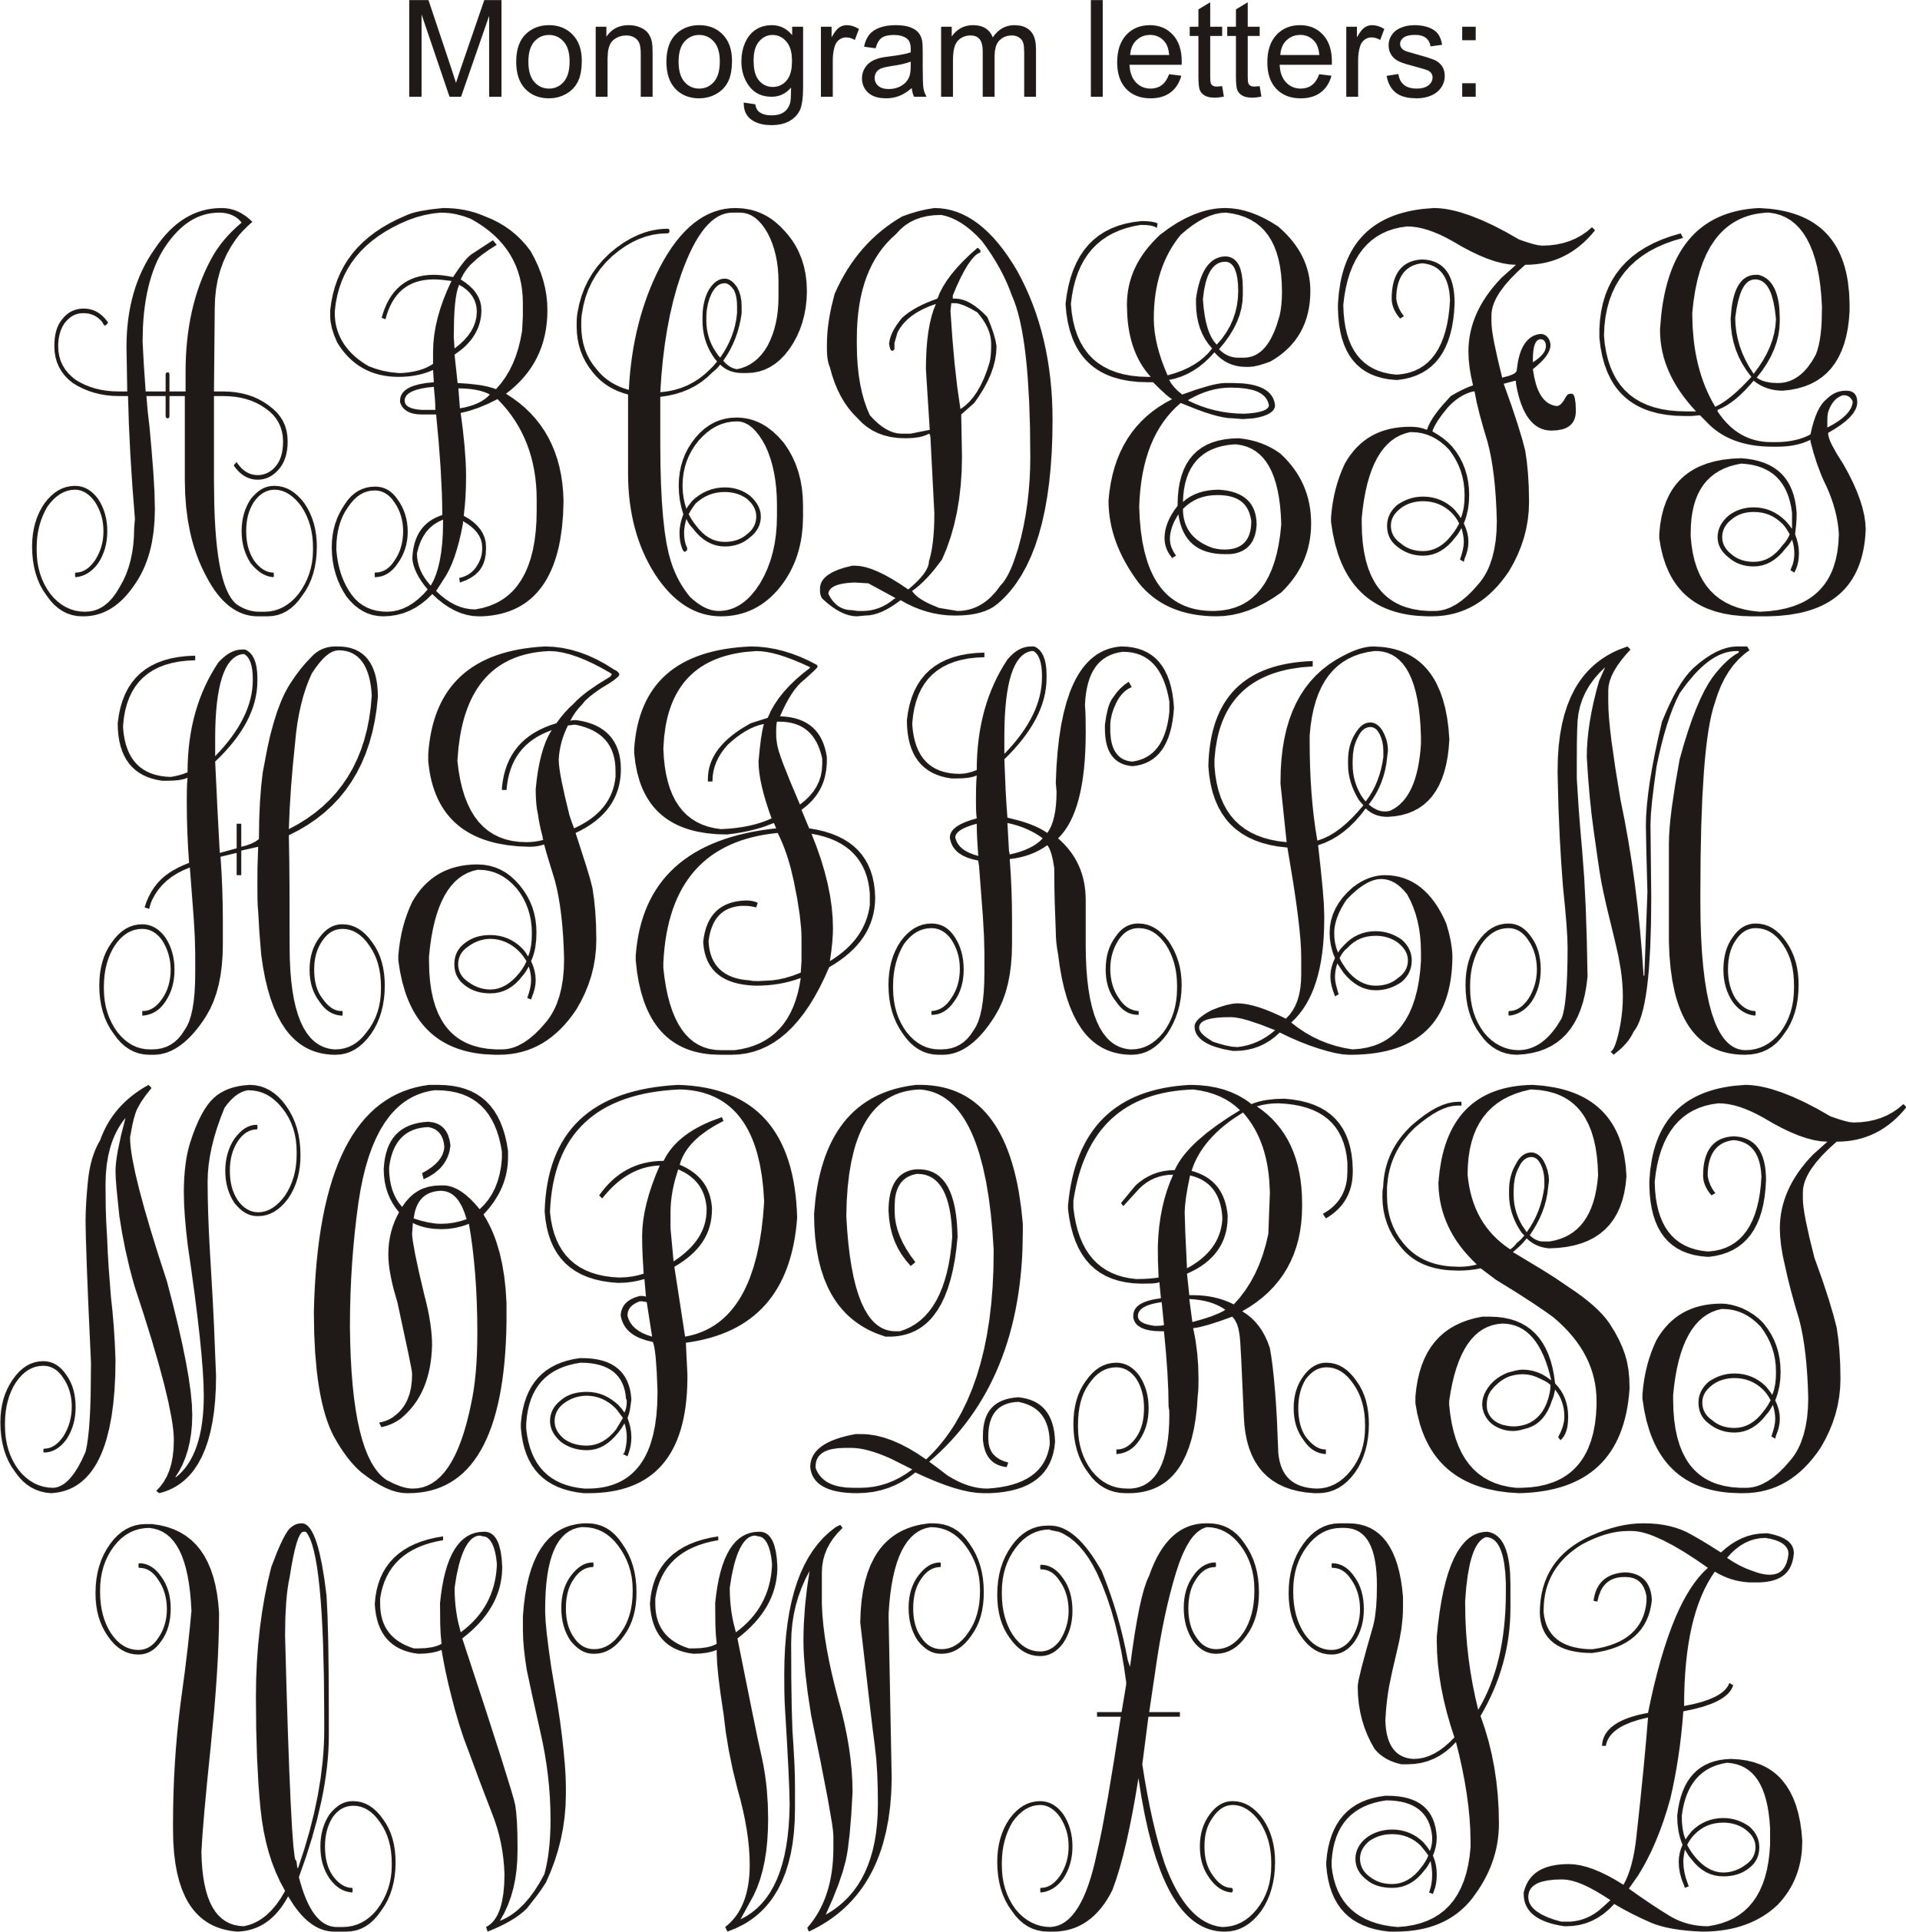 Printable Monogram Letters (70+ Images In Collection) Page 1 - Free Printable Monogram Letters